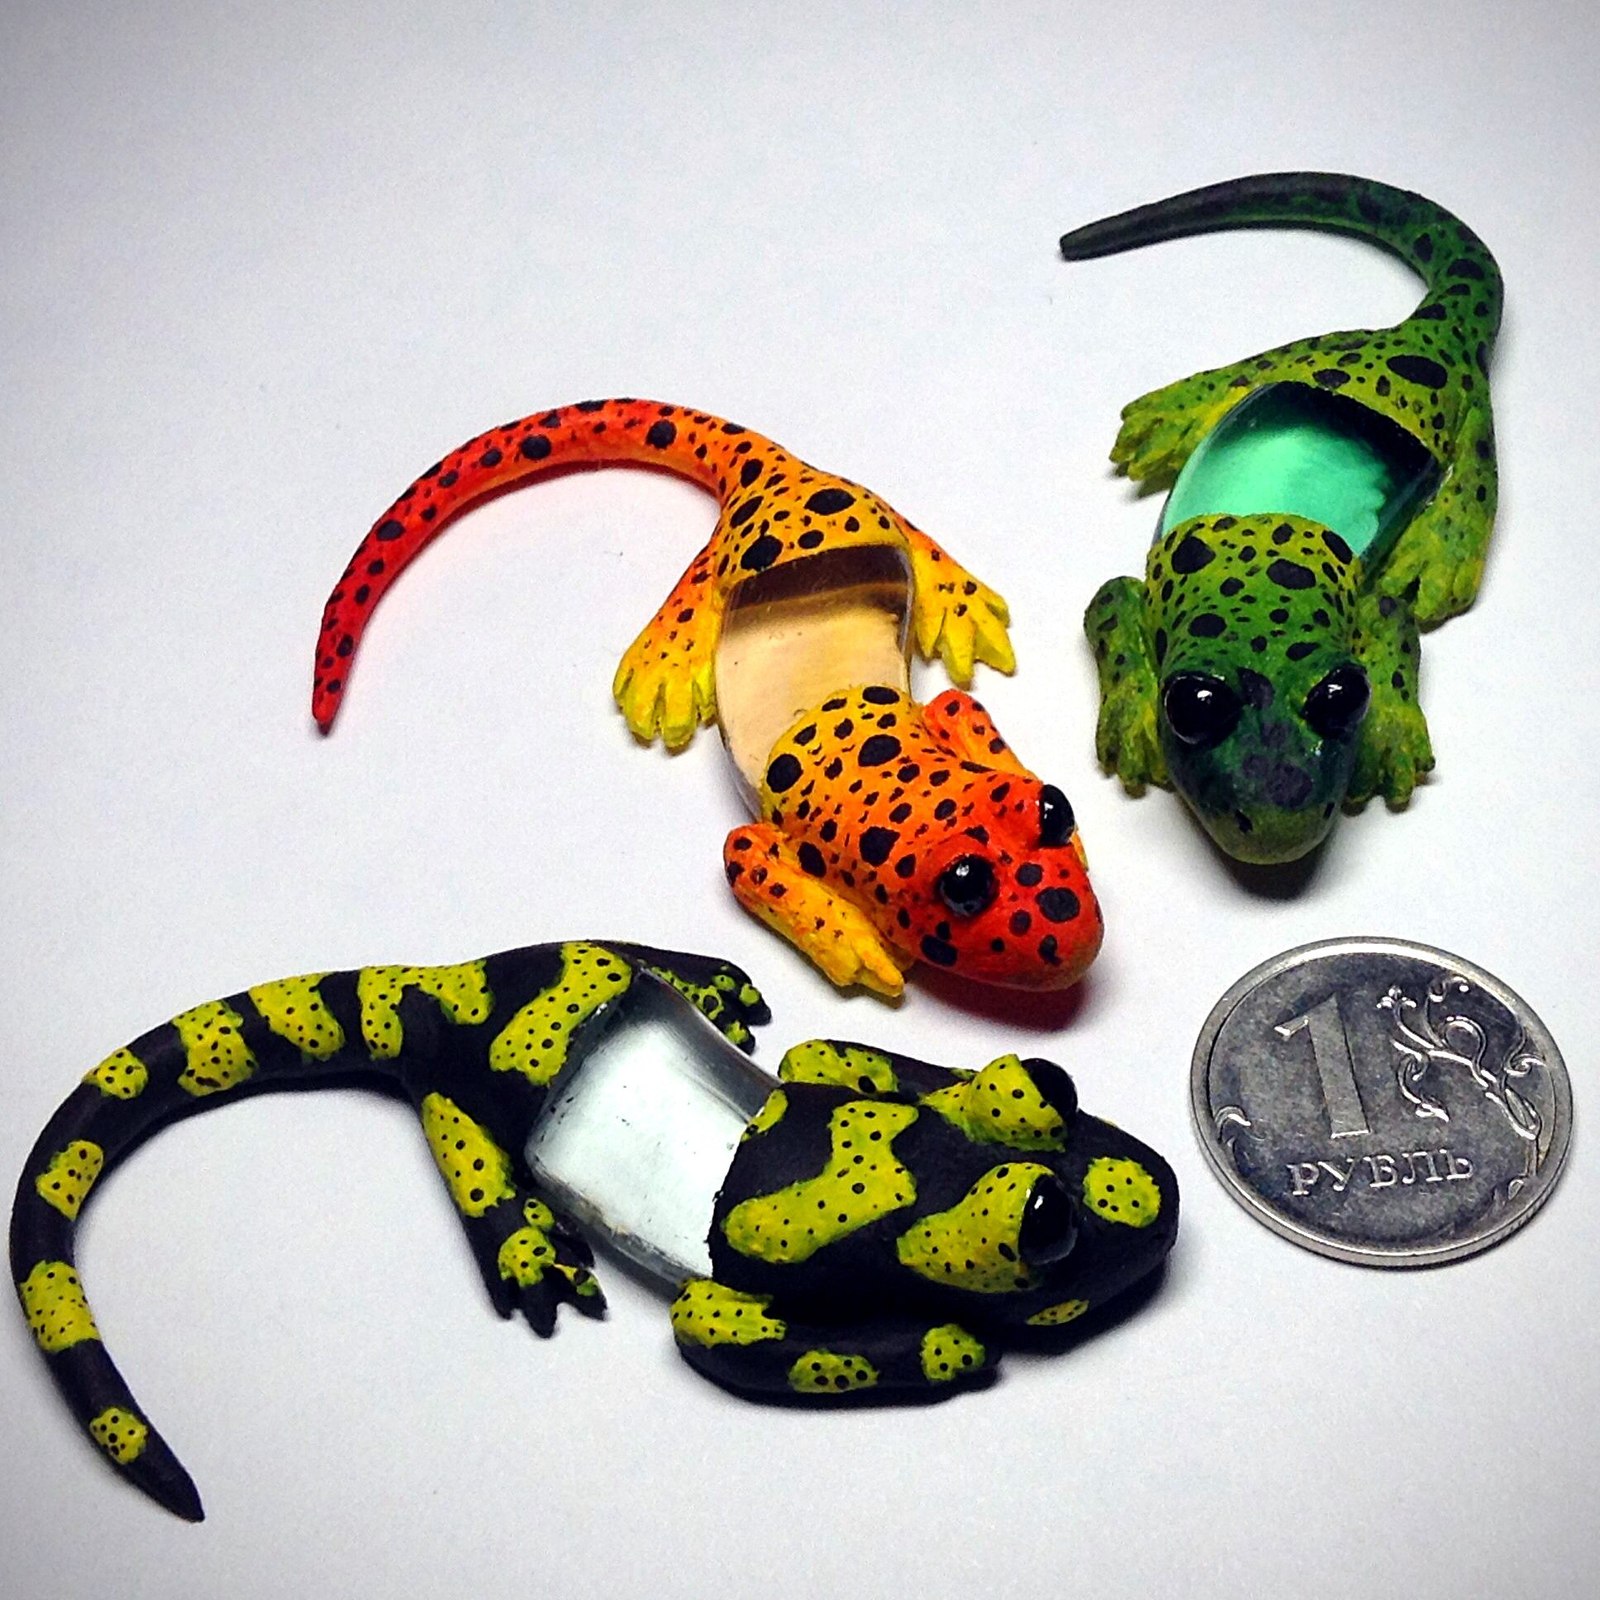 Magnets made of polymer clay and marble salamander - , Polymer clay, Amphibians, Magnet, Lizard, Salamander, My